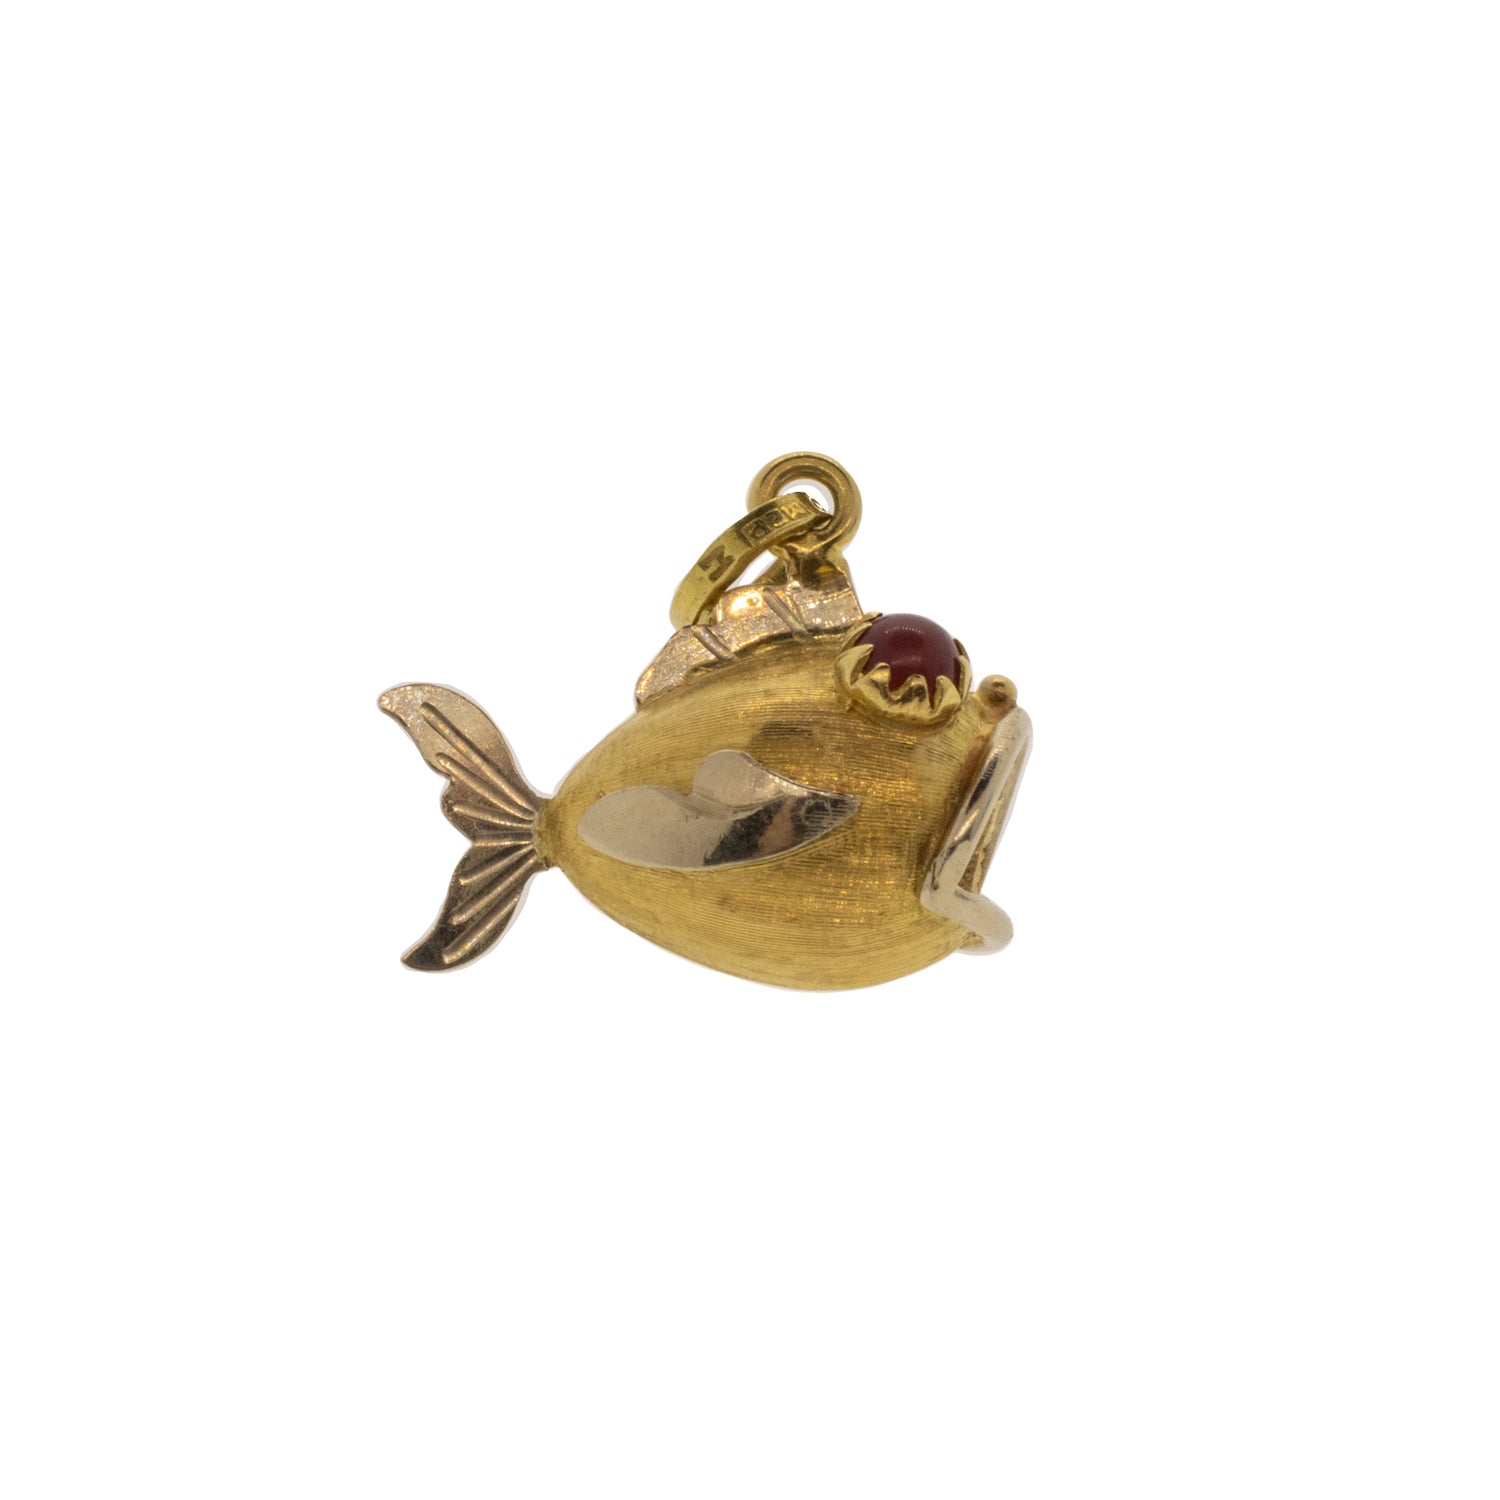 Biscuit Fish Resin Fish Charms For Jewelry Making Fashionable Floating Fish  Charm Craft For Earrings, Pendants, And Keychains From Fuyu8, $0.25